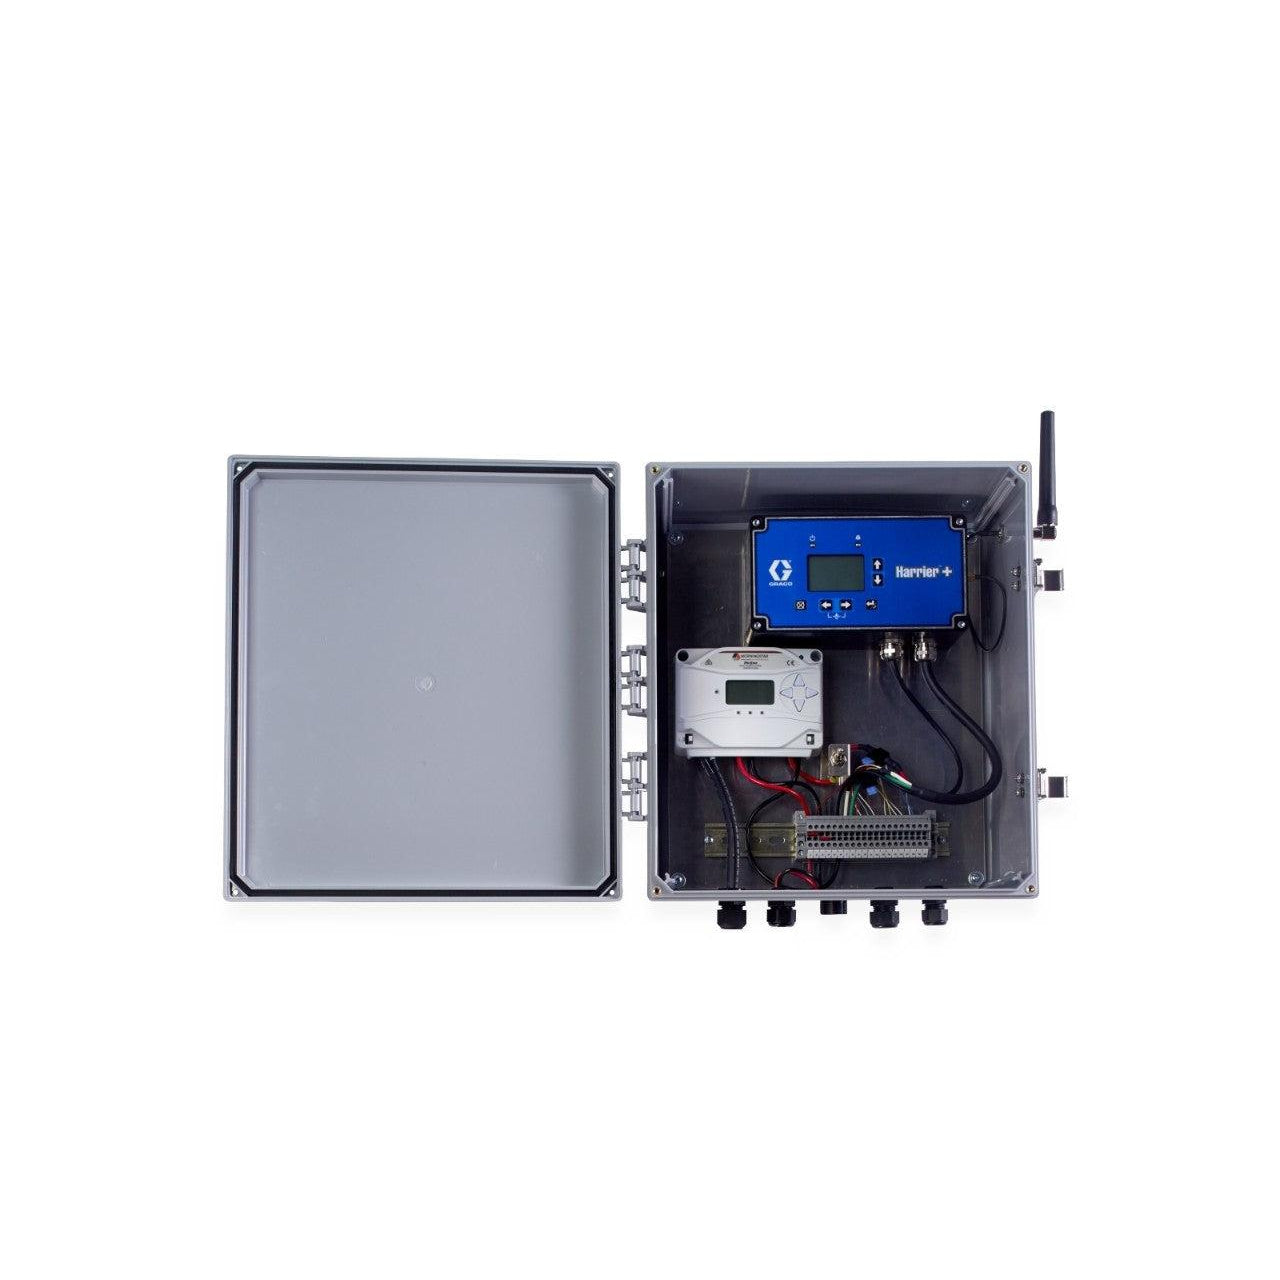 DC Control Box without Controller and Includes Prostar 30 One Panel Charge Controller, NEMA Rated